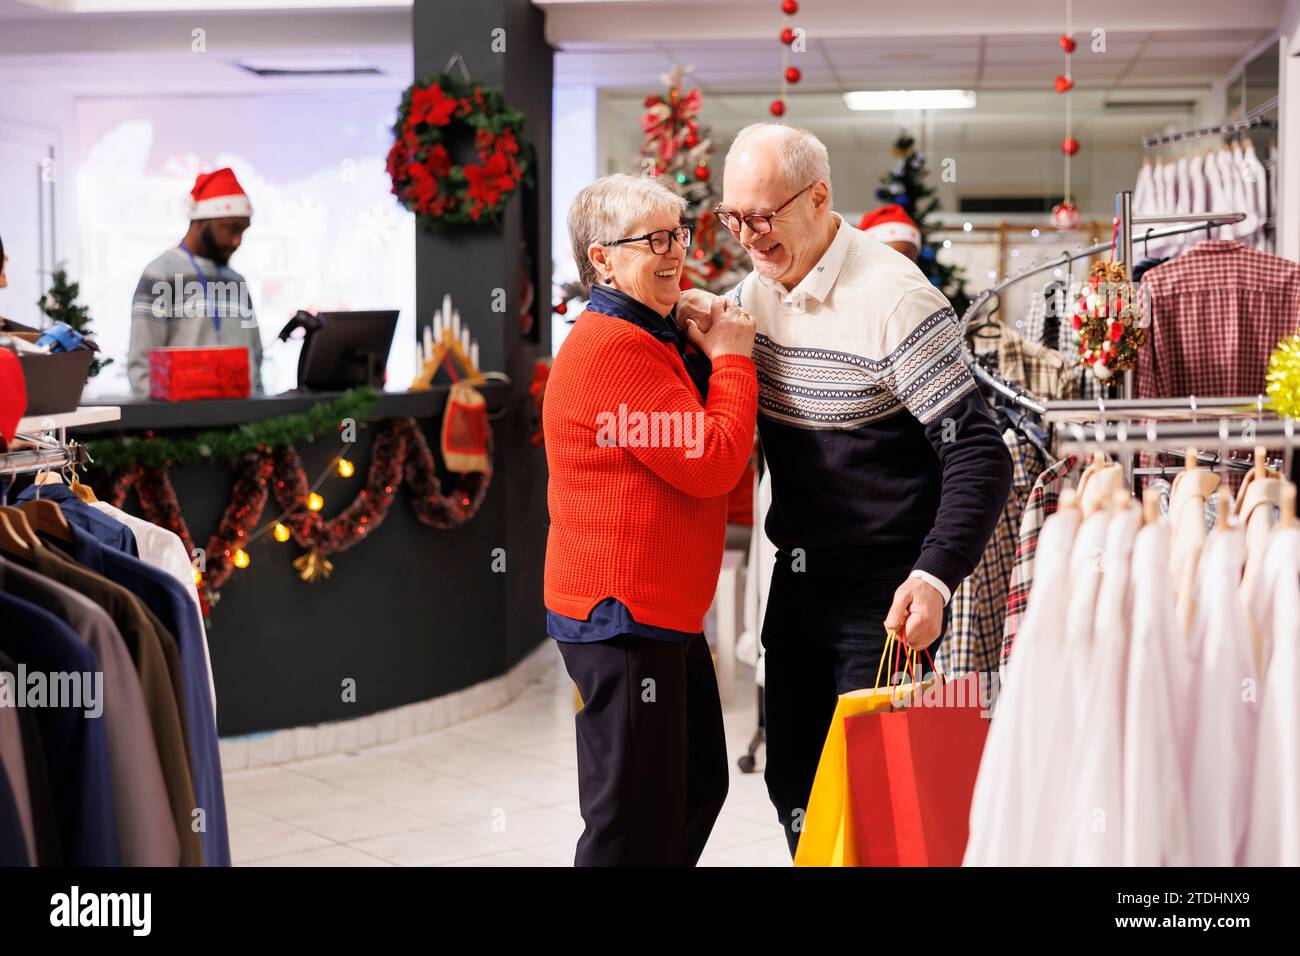 Elderly people doing sweet waltz dance in retail store, showing sincere feelings at mall during seasonal christmas promotions. Romantic man and woman dancing around in shopping center, xmas spirit. Stock Photo